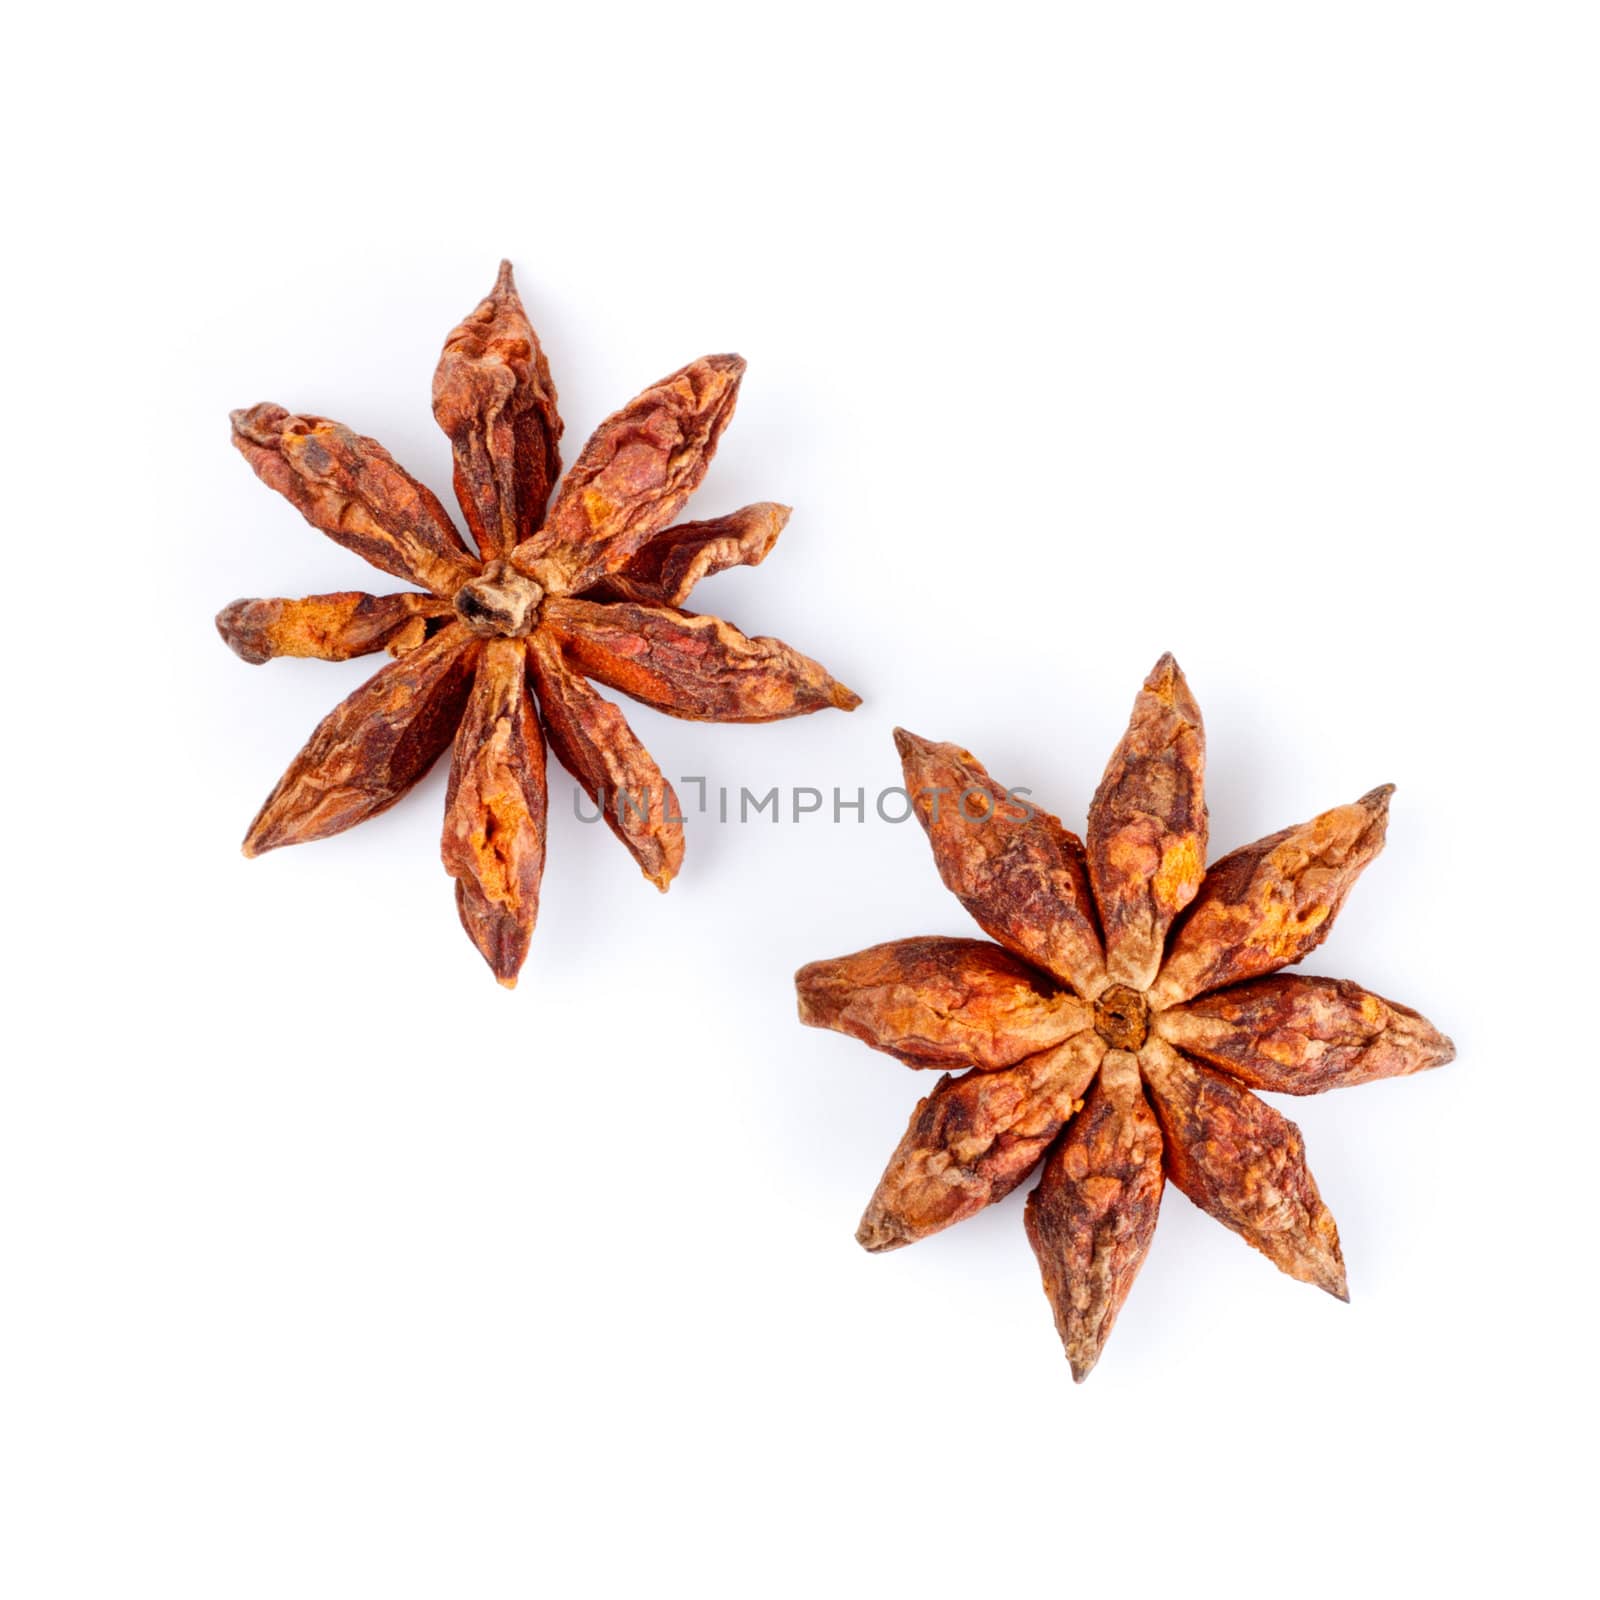 two star anise isolated on white background